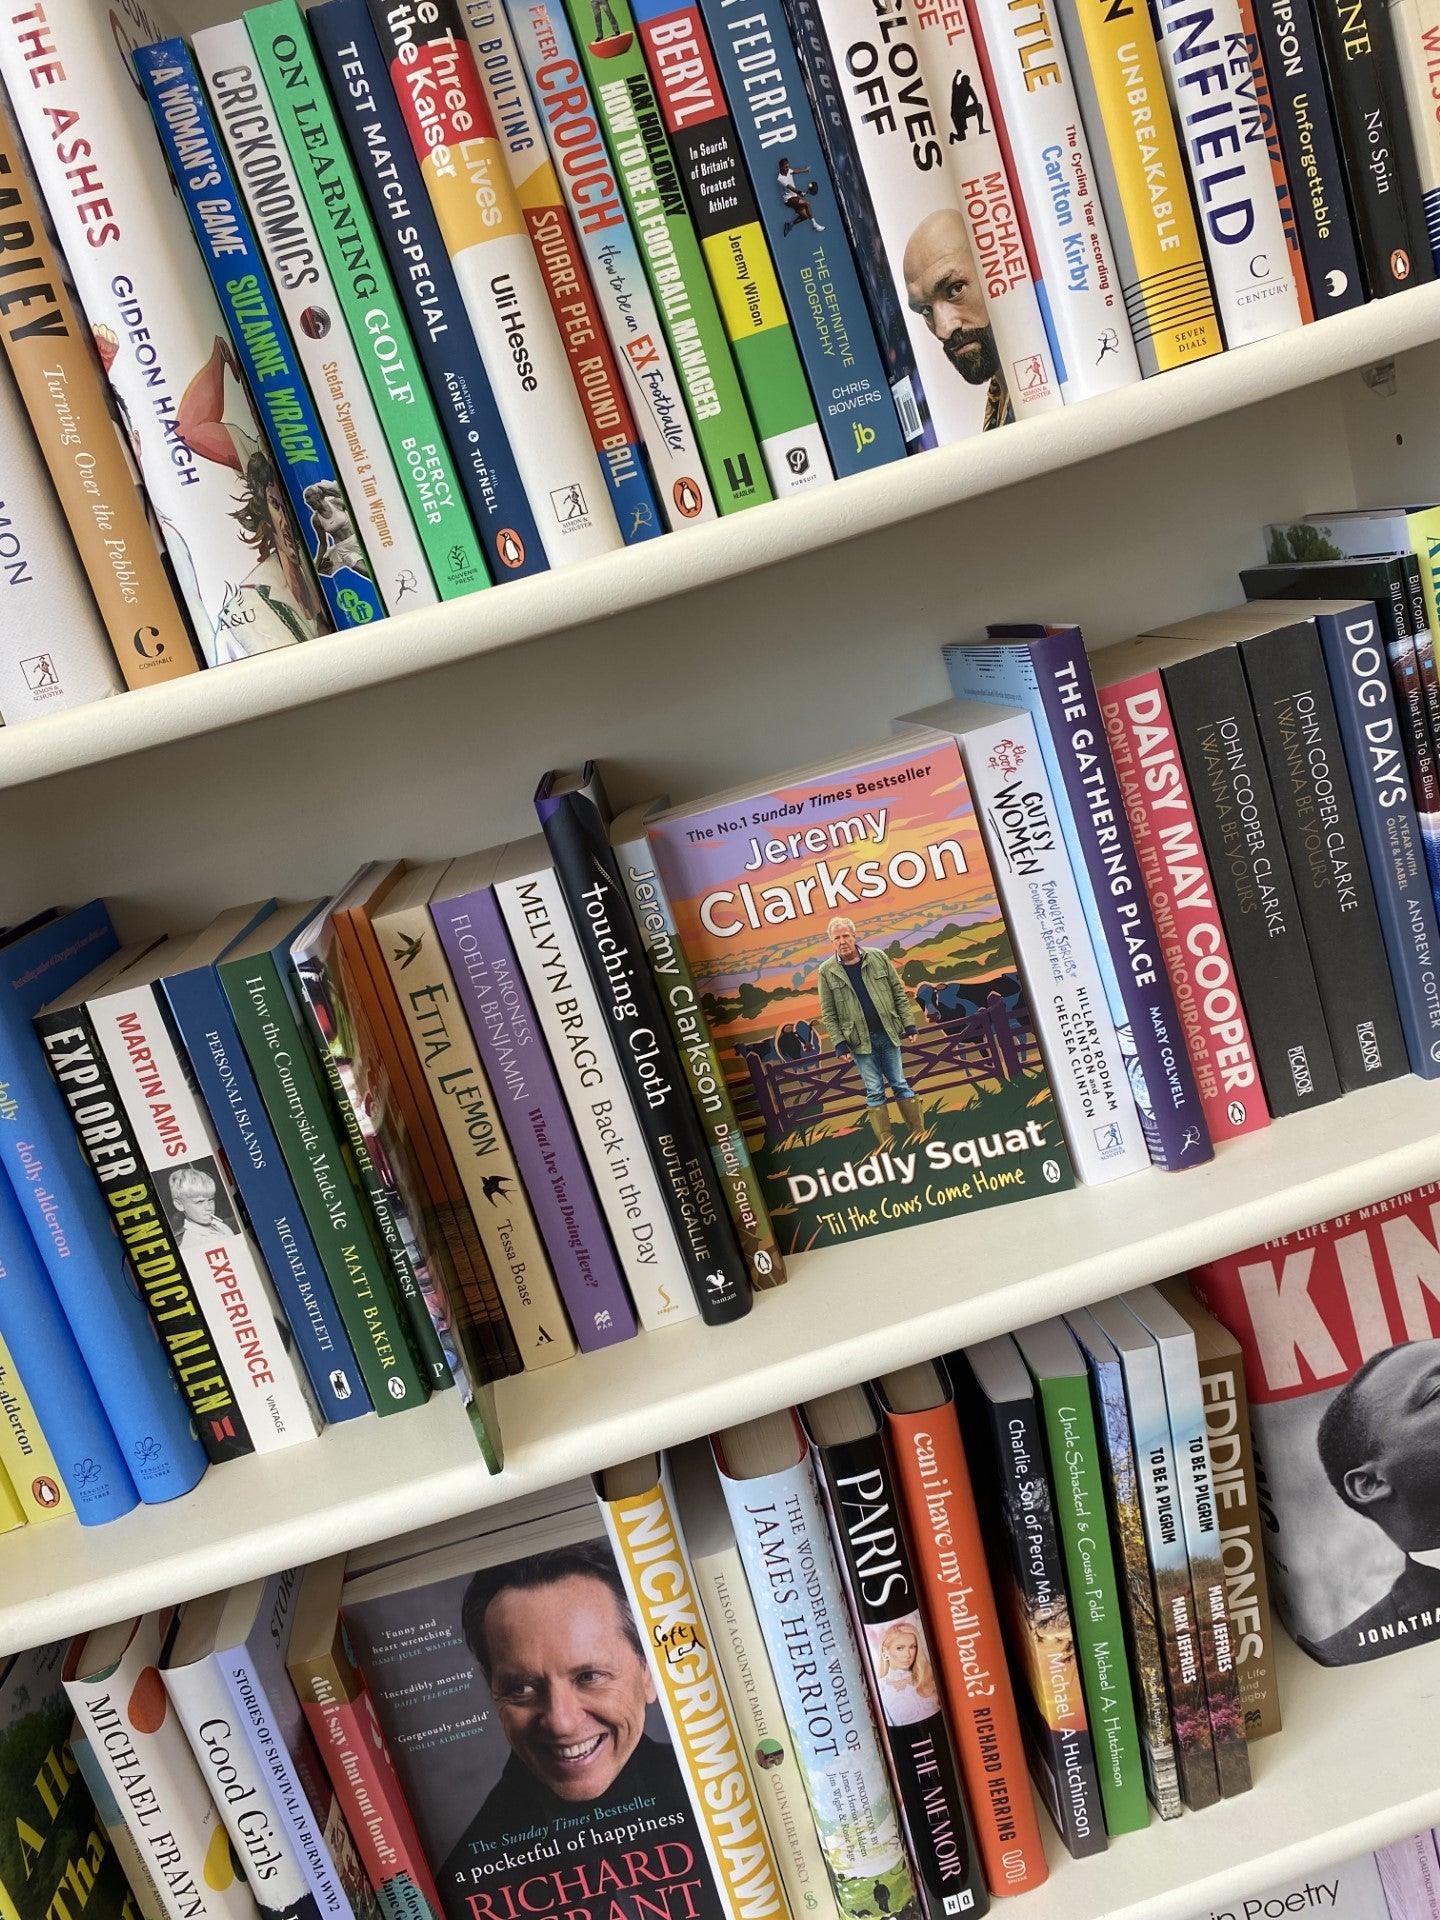 Biography and Sport - The Cleeve Bookshop